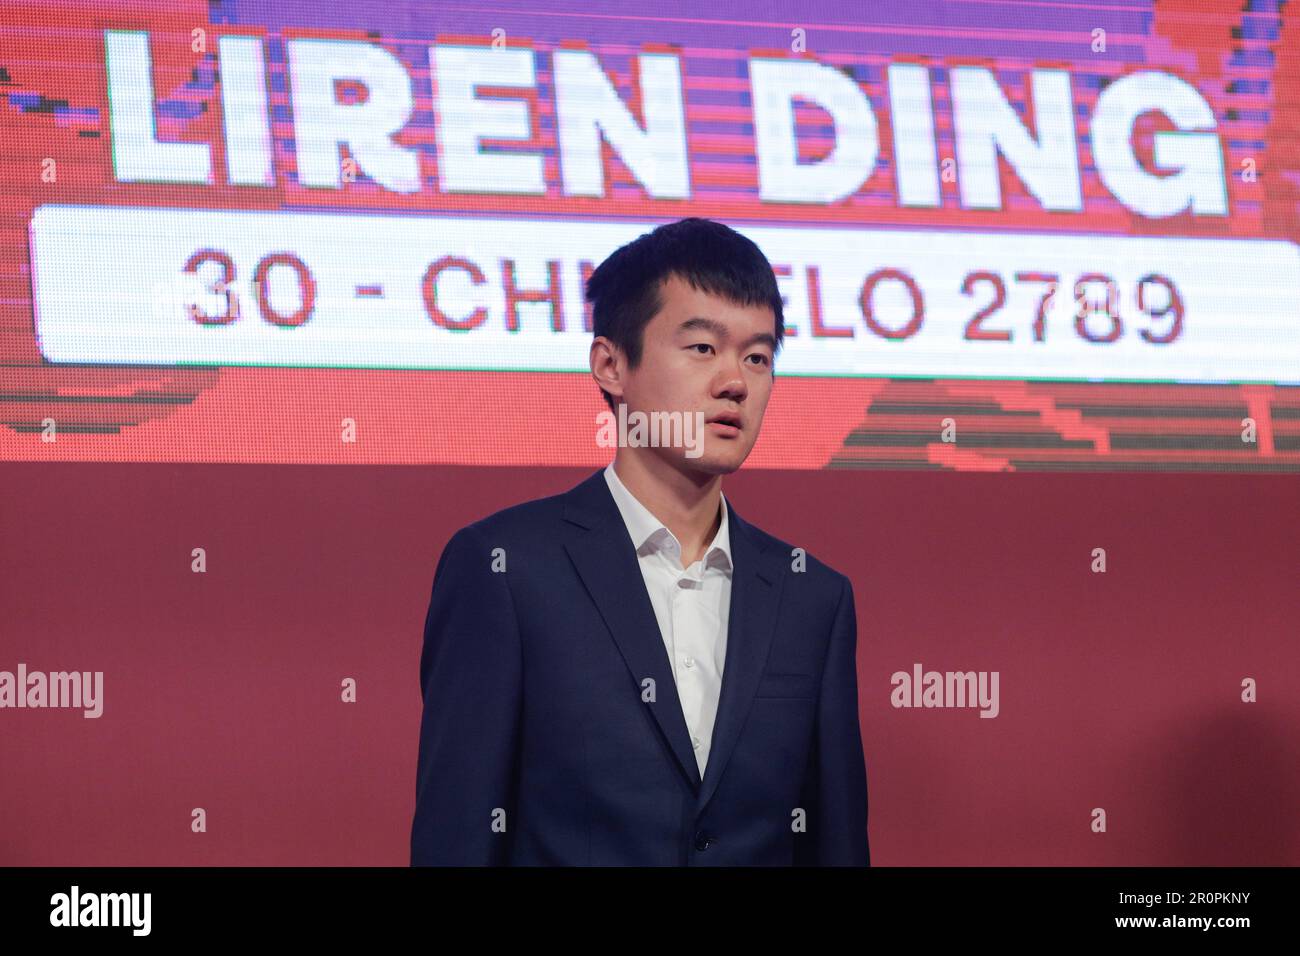 Bucharest, Romania - May 5, 2023: Ding Liren, a Chinese chess grandmaster and the reigning World Chess Champion, at the Grand Chess Tour 2023 - Superb Stock Photo